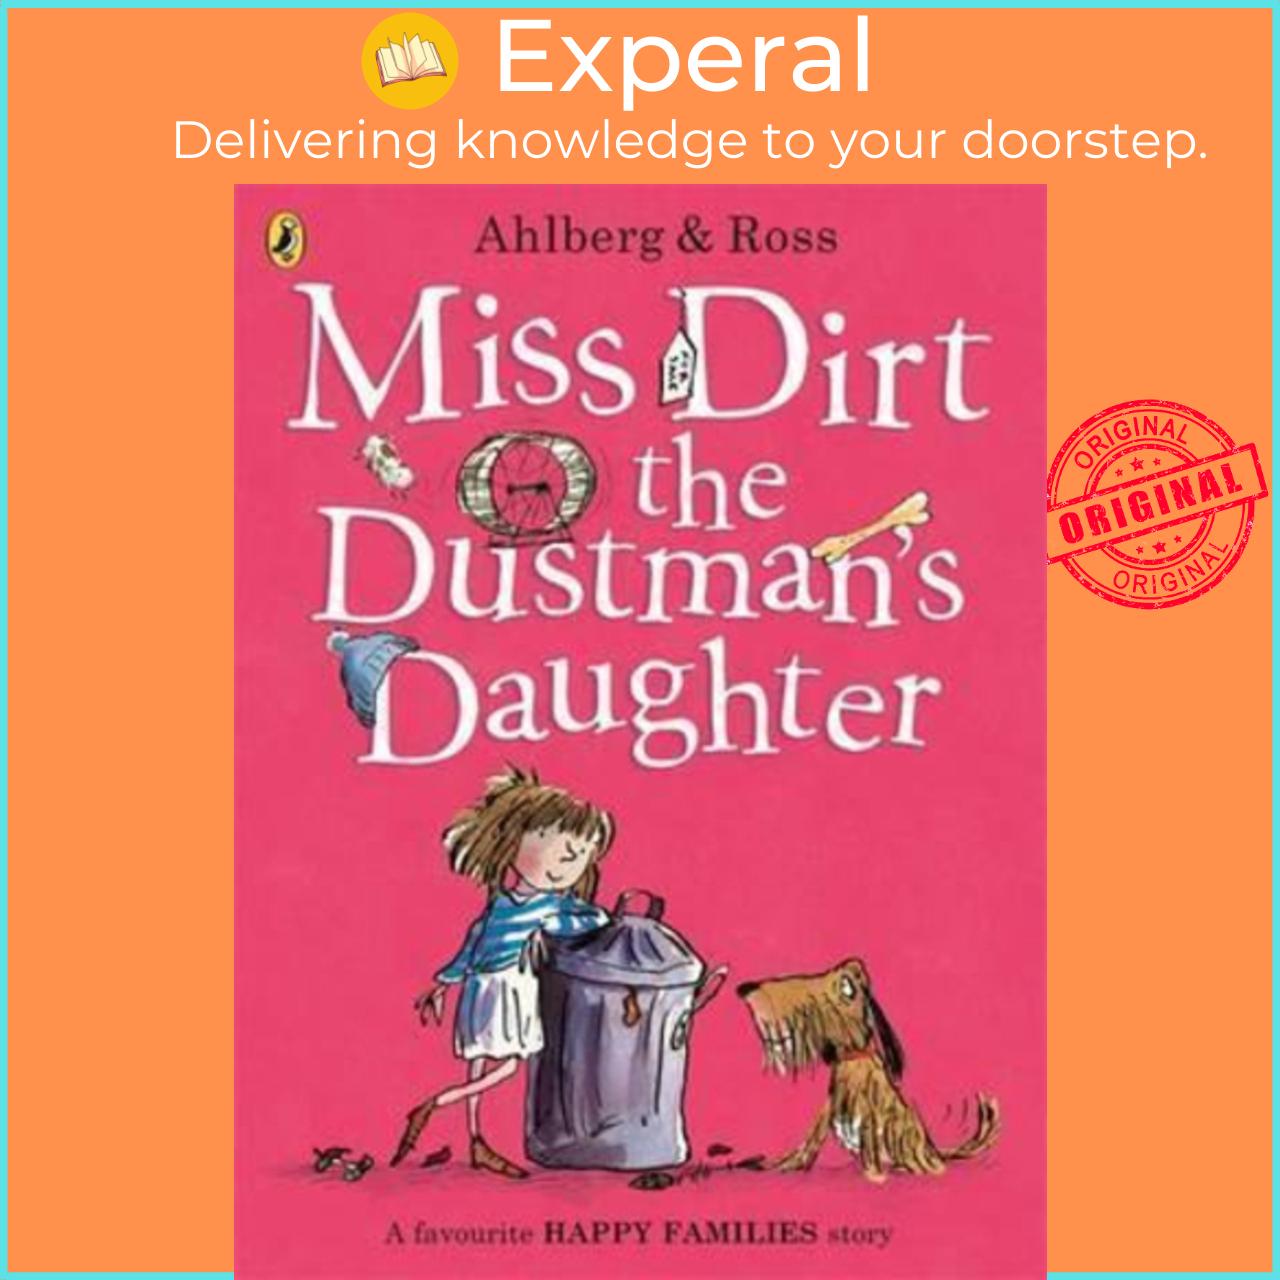 Sách - Miss Dirt the Dustman's Daughter by Allan Ahlberg (UK edition, paperback)